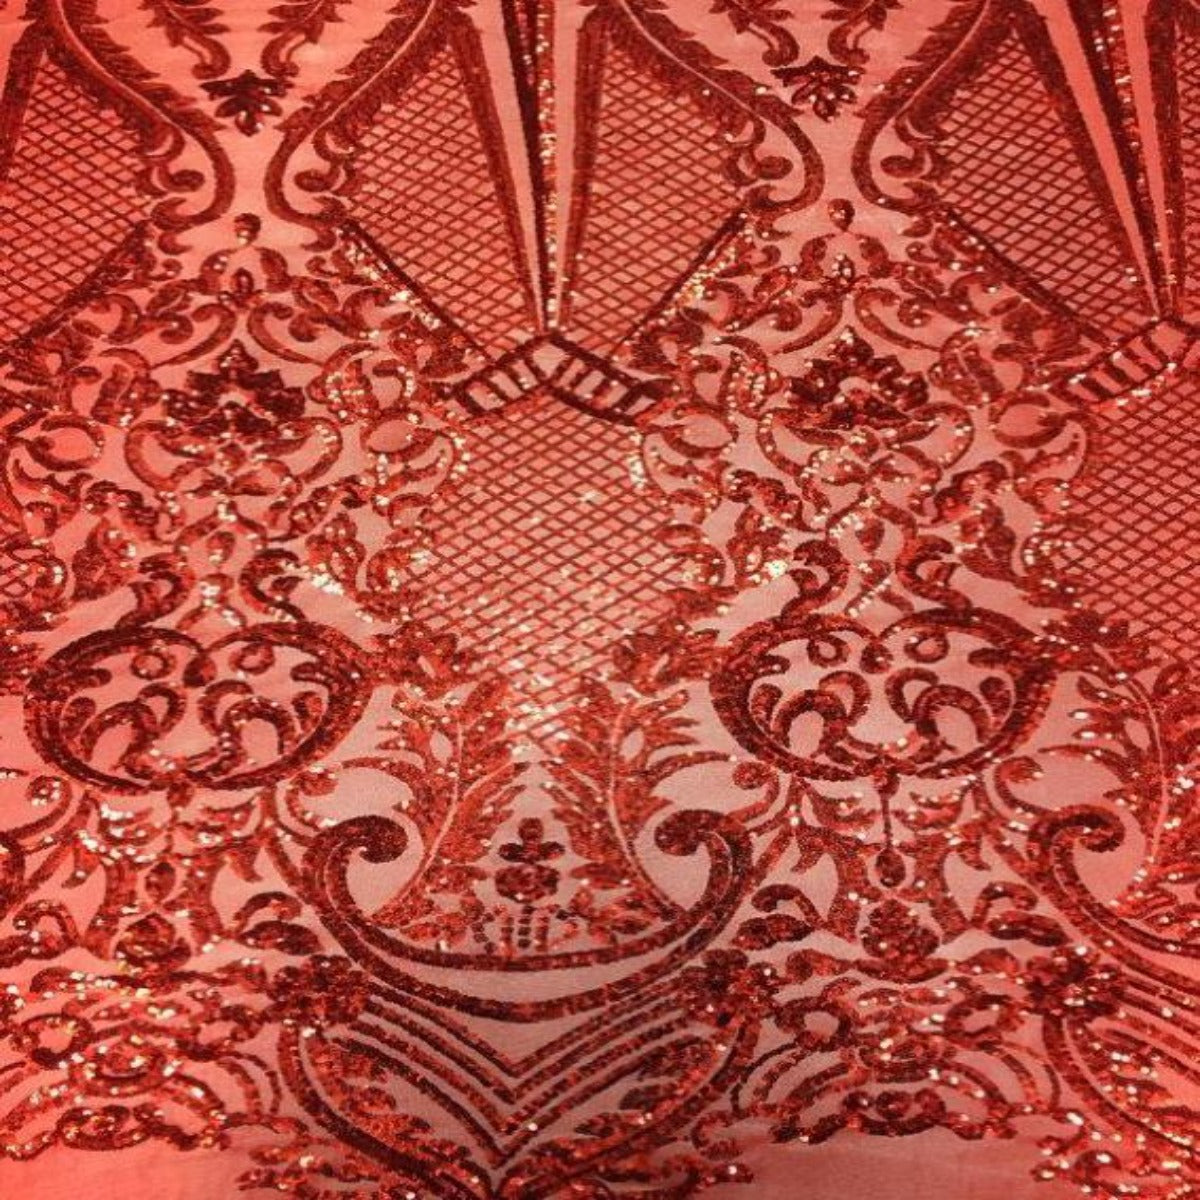 Red Chantal Deluxe Sequins Lace Fabric - Fashion Fabrics LLC